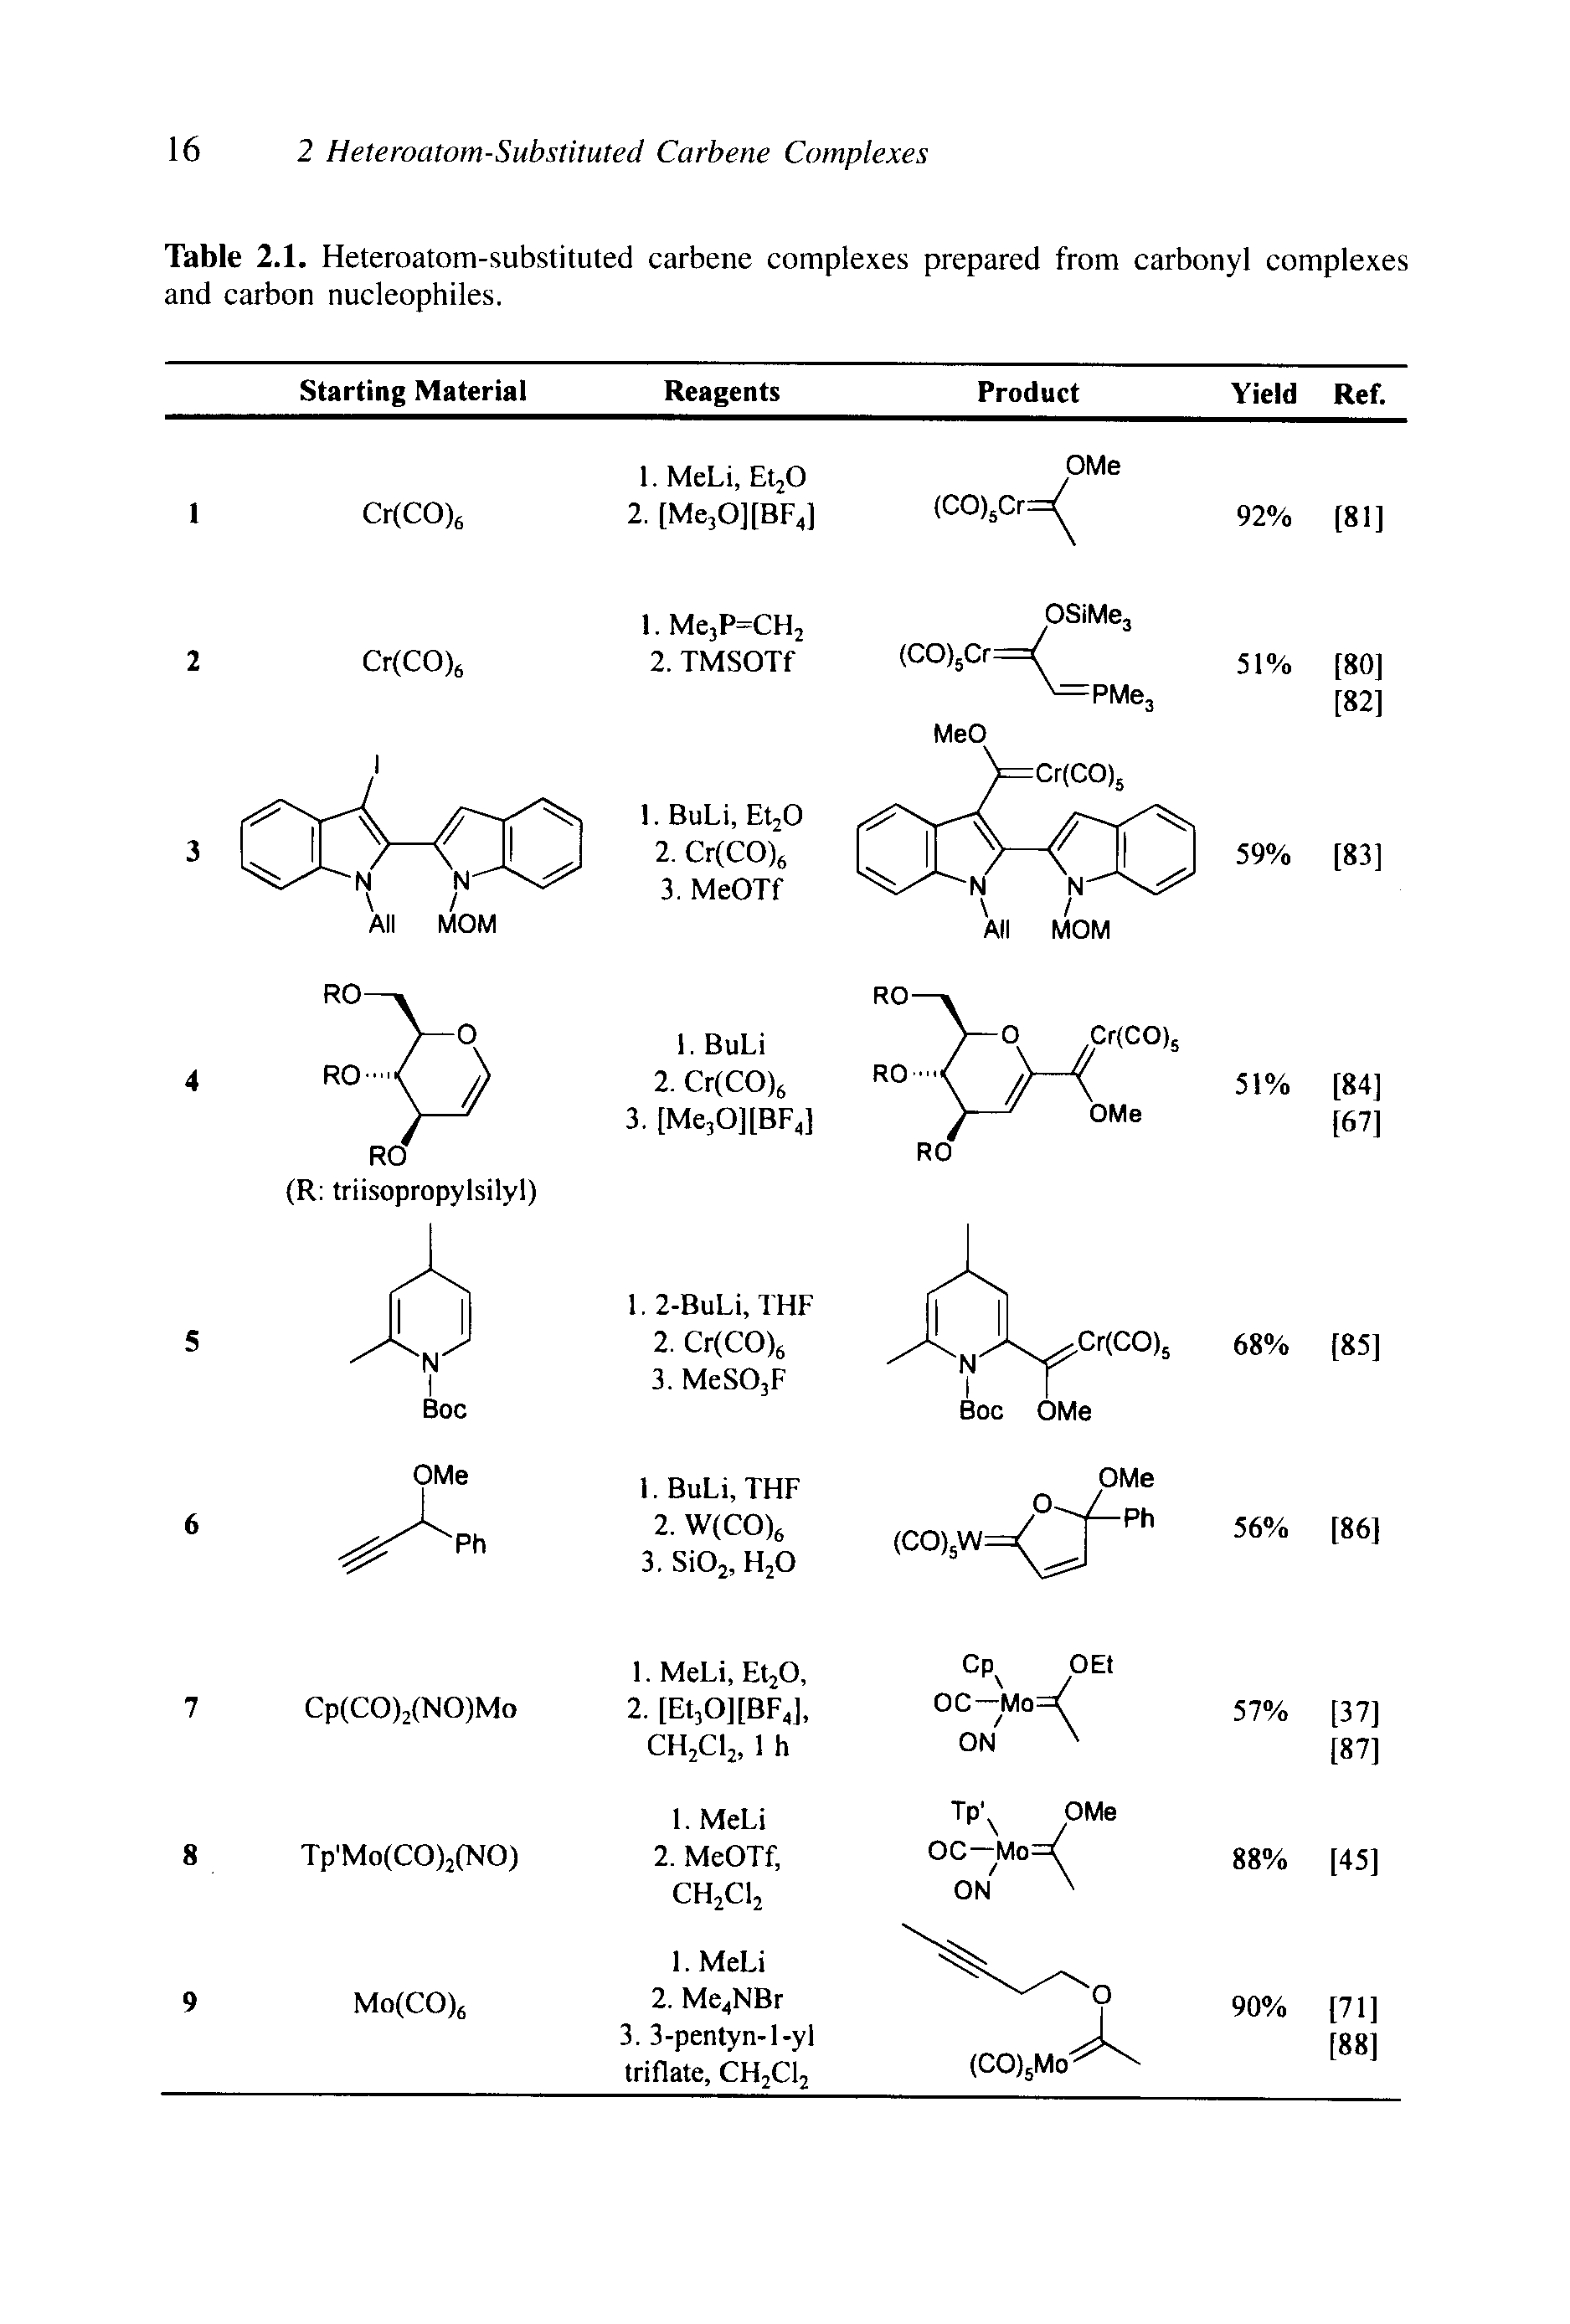 Table 2.1. Heteroatom-substituted carbene complexes prepared from carbonyl complexes and carbon nucleophiles.